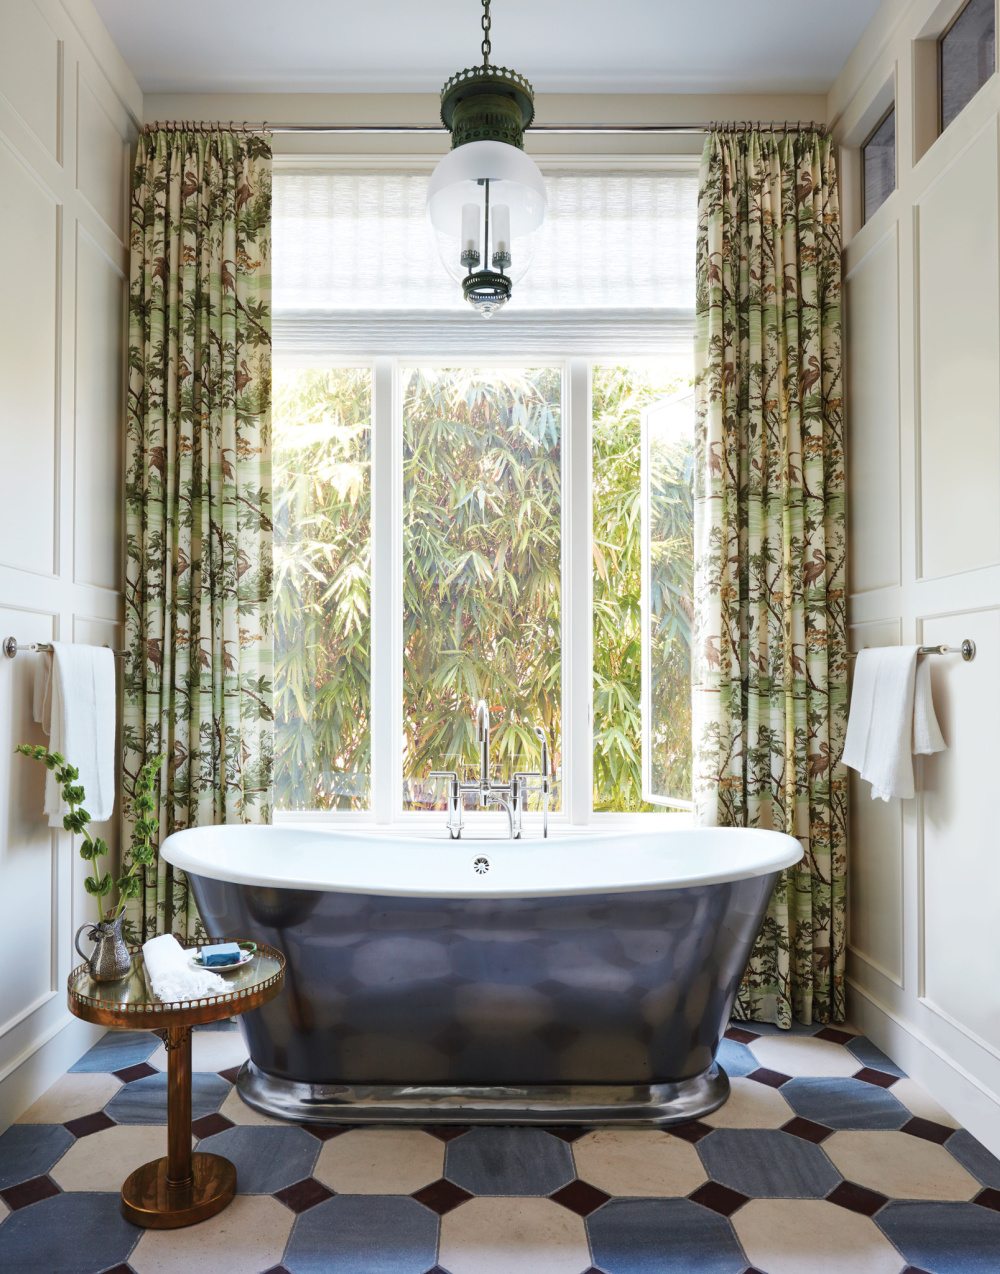 Luxurious fantasy bath with soaking tub in front of large window - in THE ULTIMATE BATH by Barbara Sallick (Rizzoli, 2022).